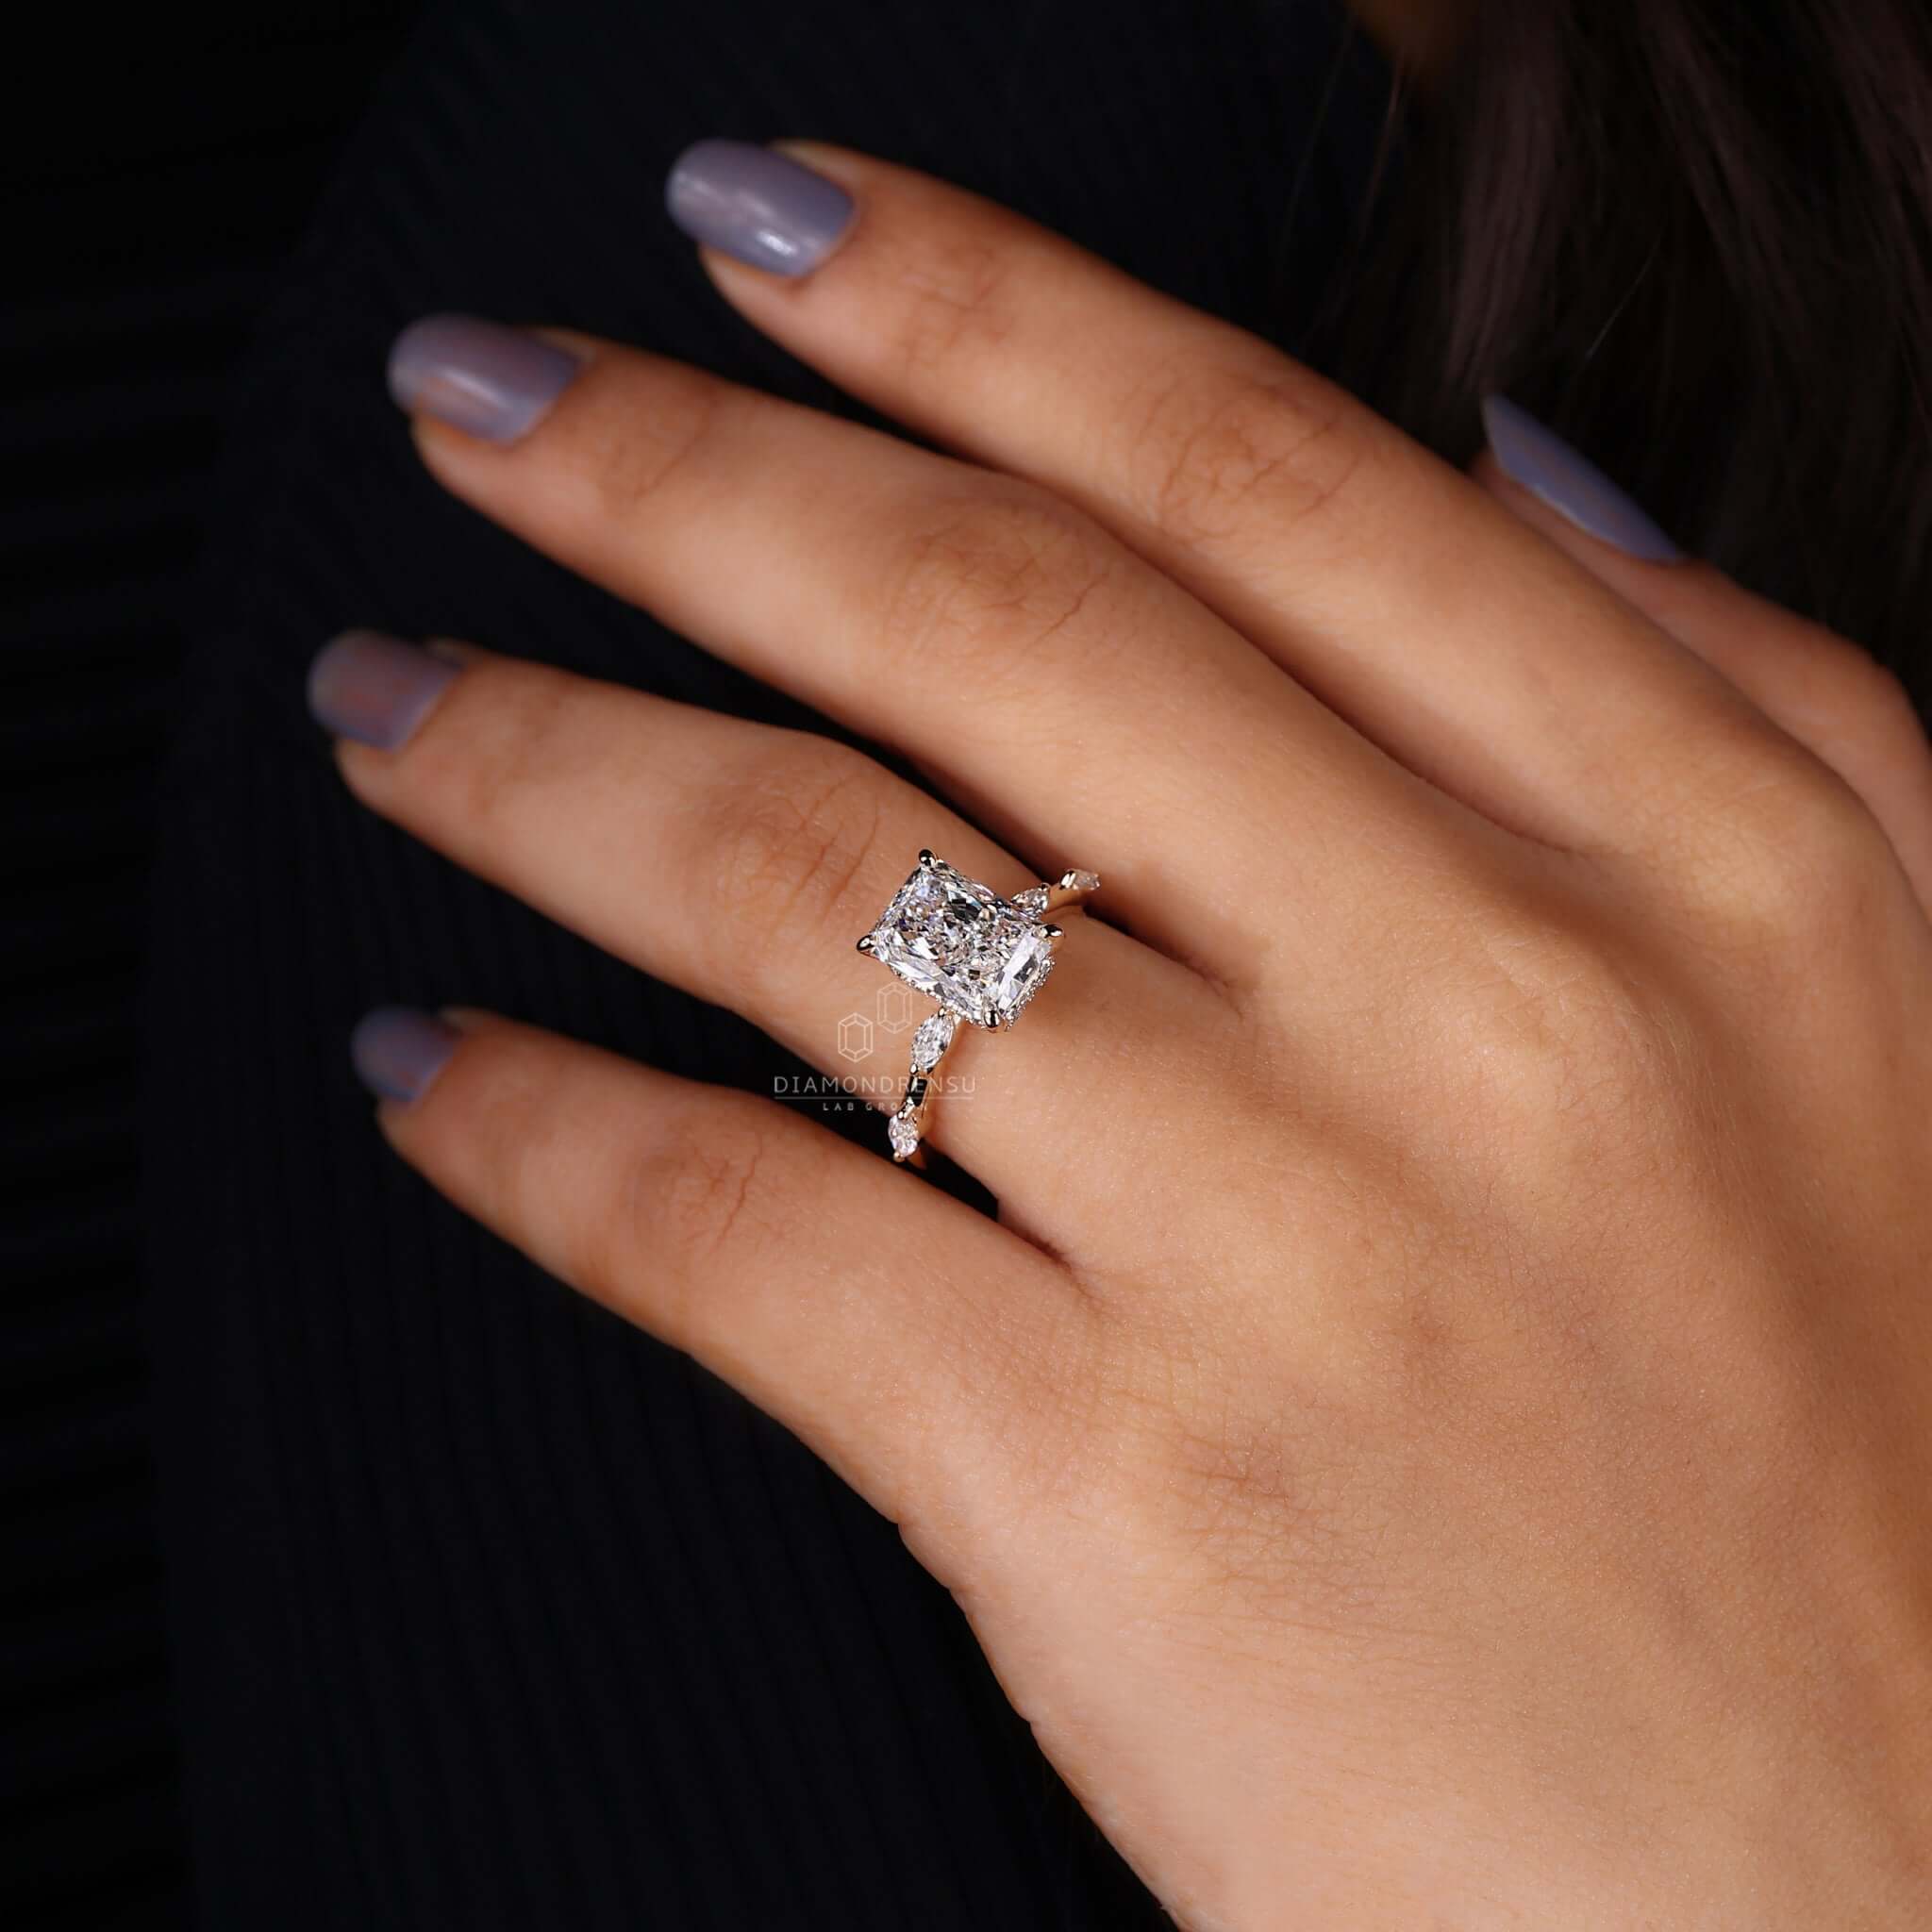 Sophisticated radiant cut diamond ring, exemplifying luxury and timeless elegance.